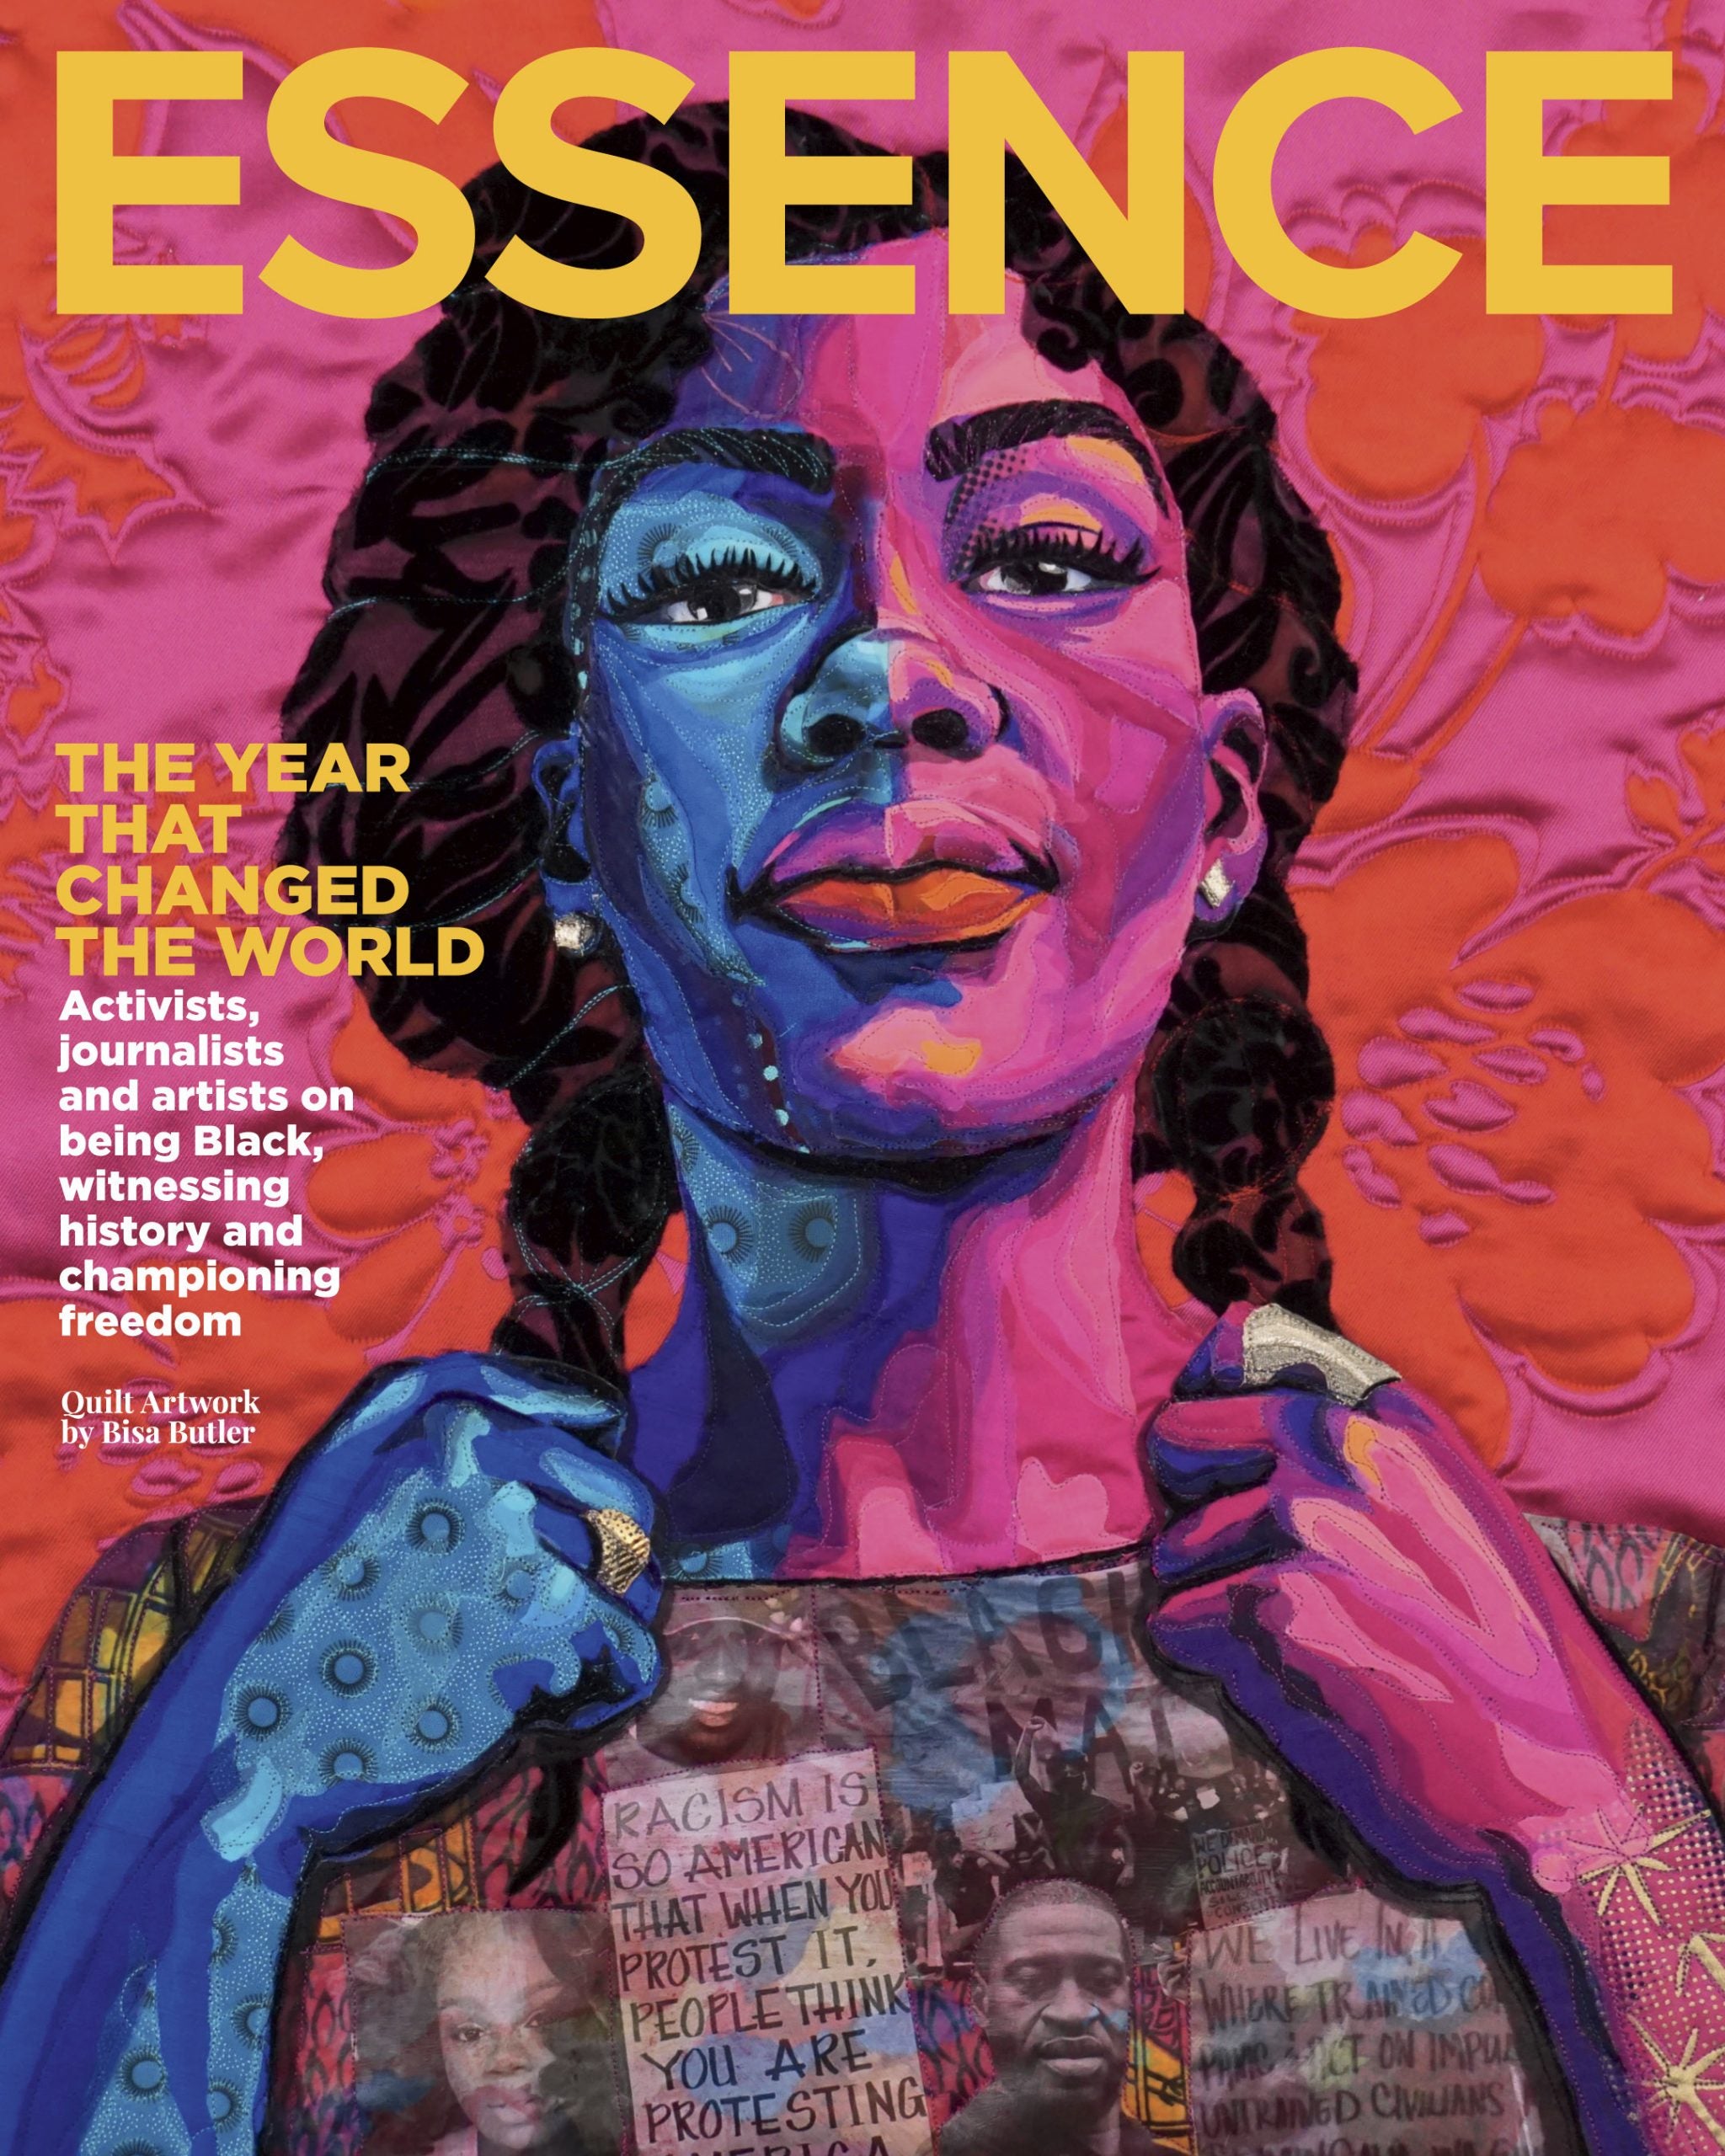 WATCH: ‘Our Time Is Now’ Says ESSENCE Cover Artist Bisa Butler